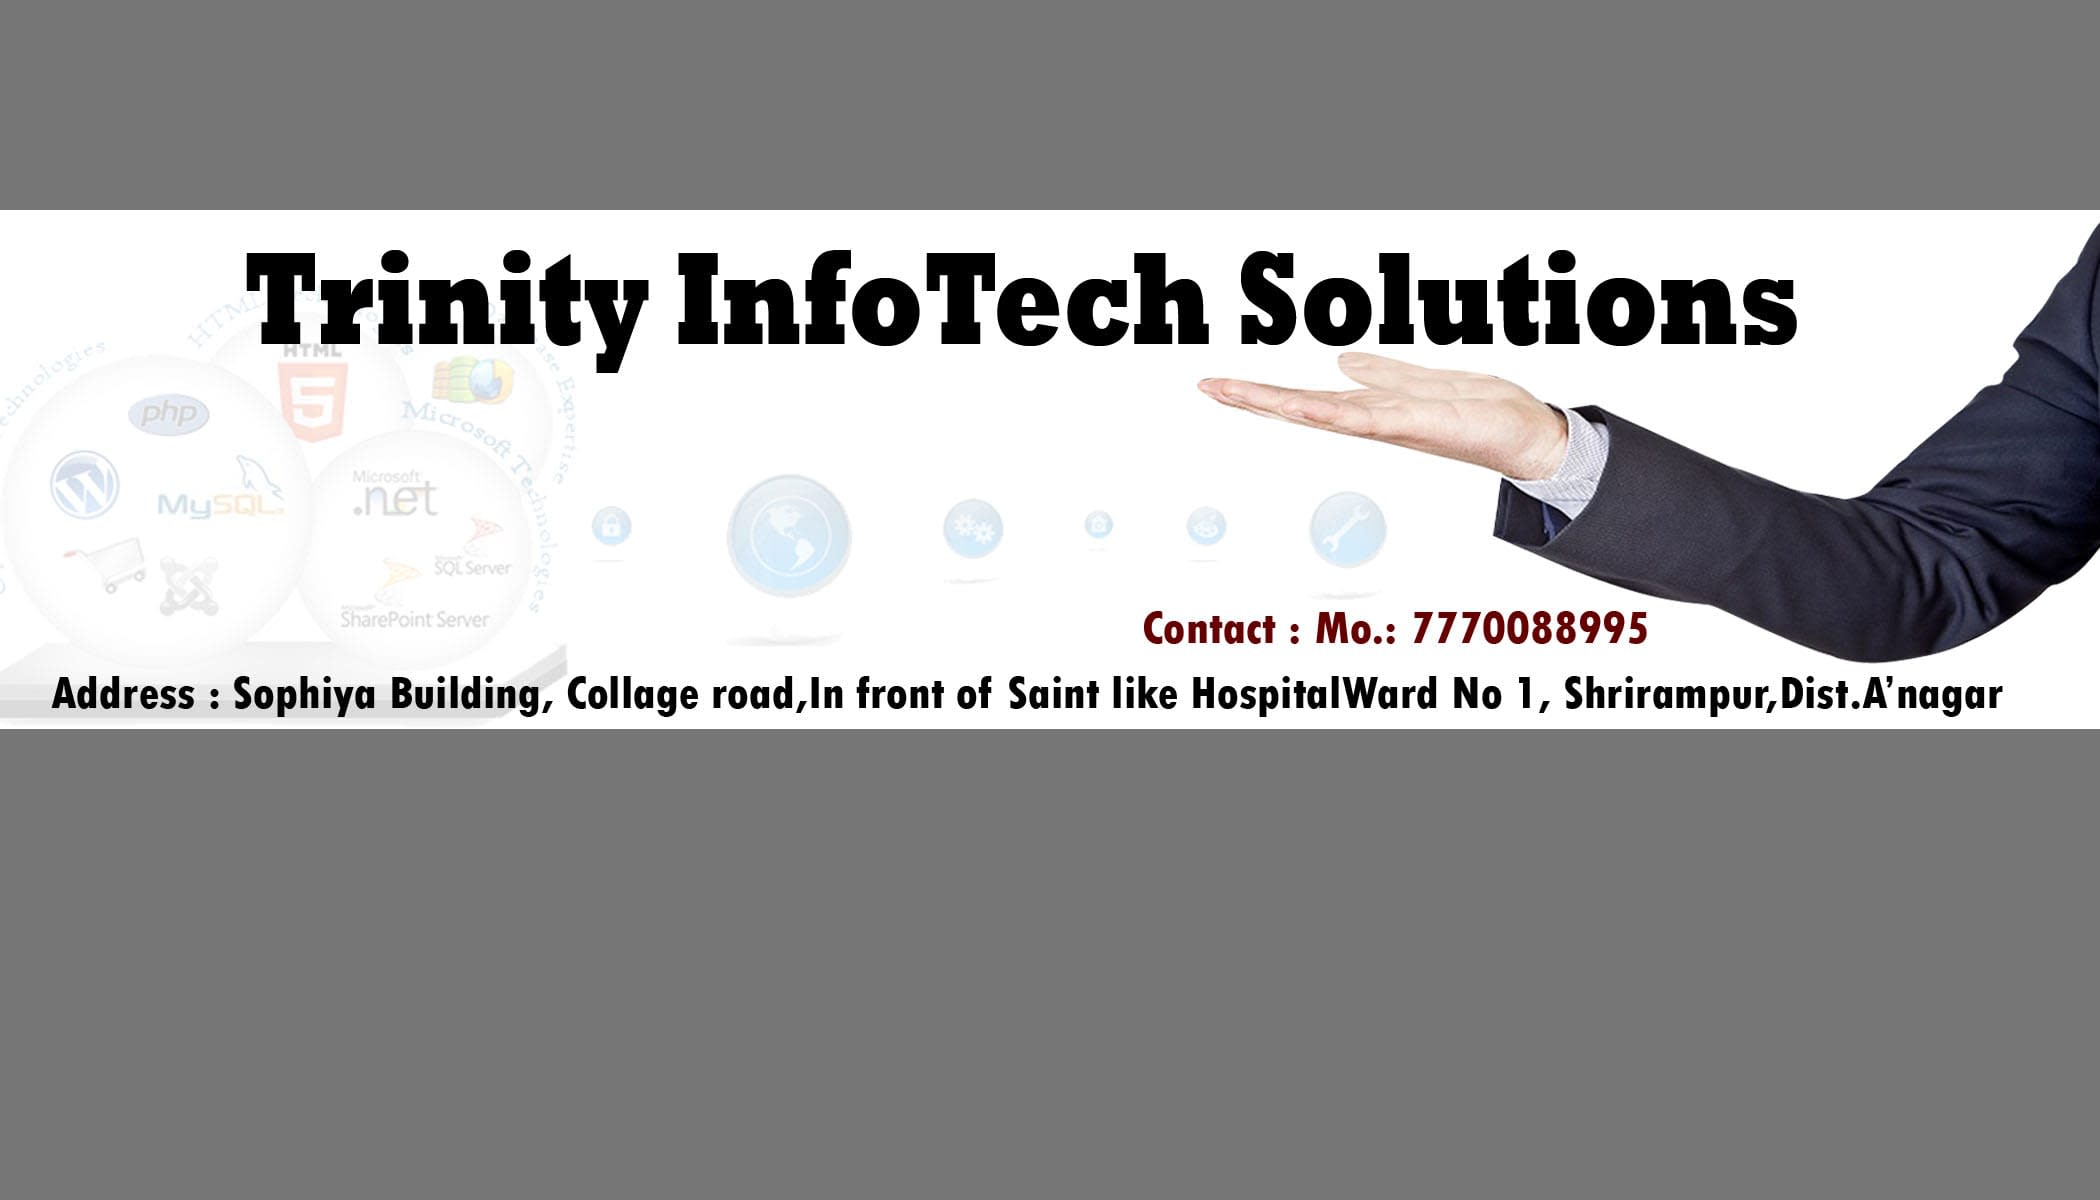 Trinity Infotech Solutions